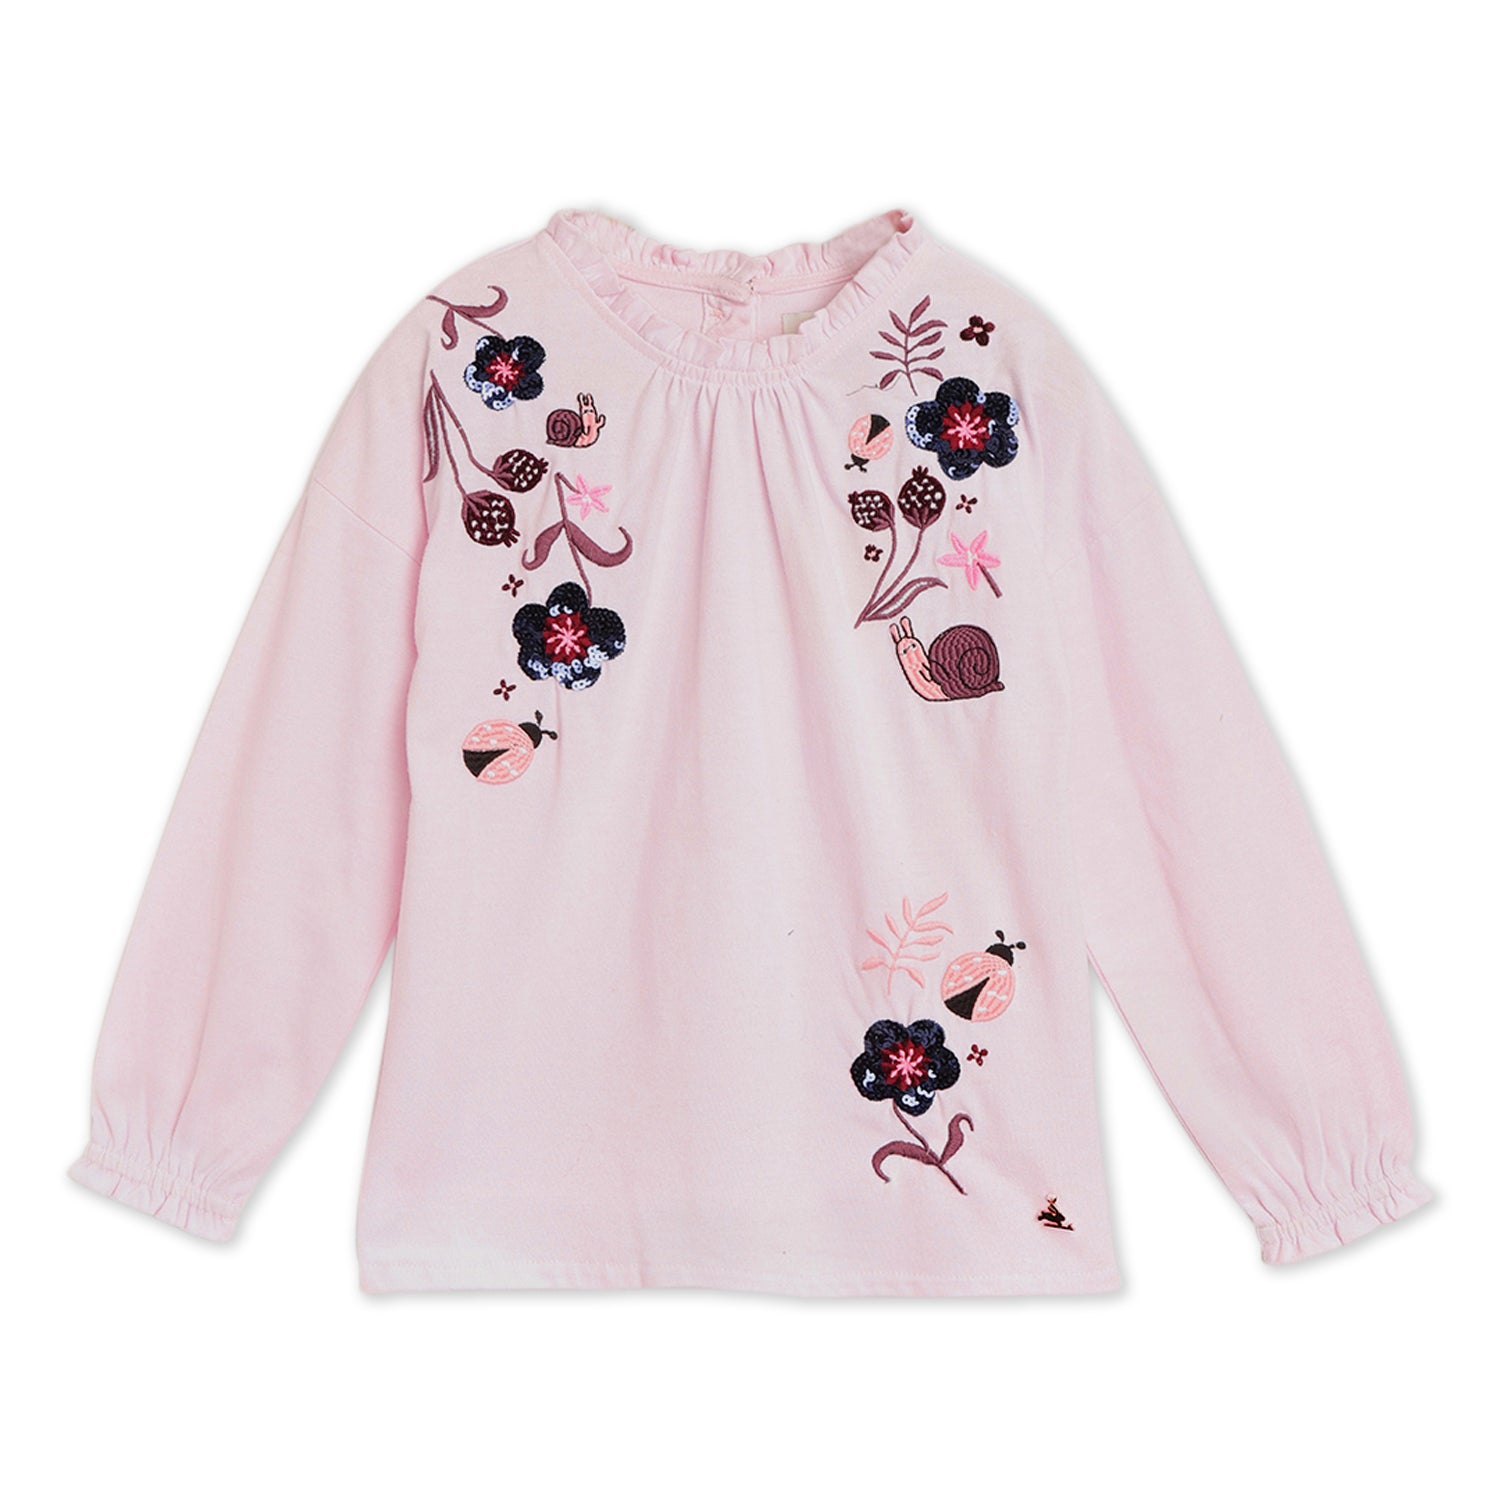 Twirly Tops | Tees for girls & toddlers– Cherry Crumble by Nitt Hyman